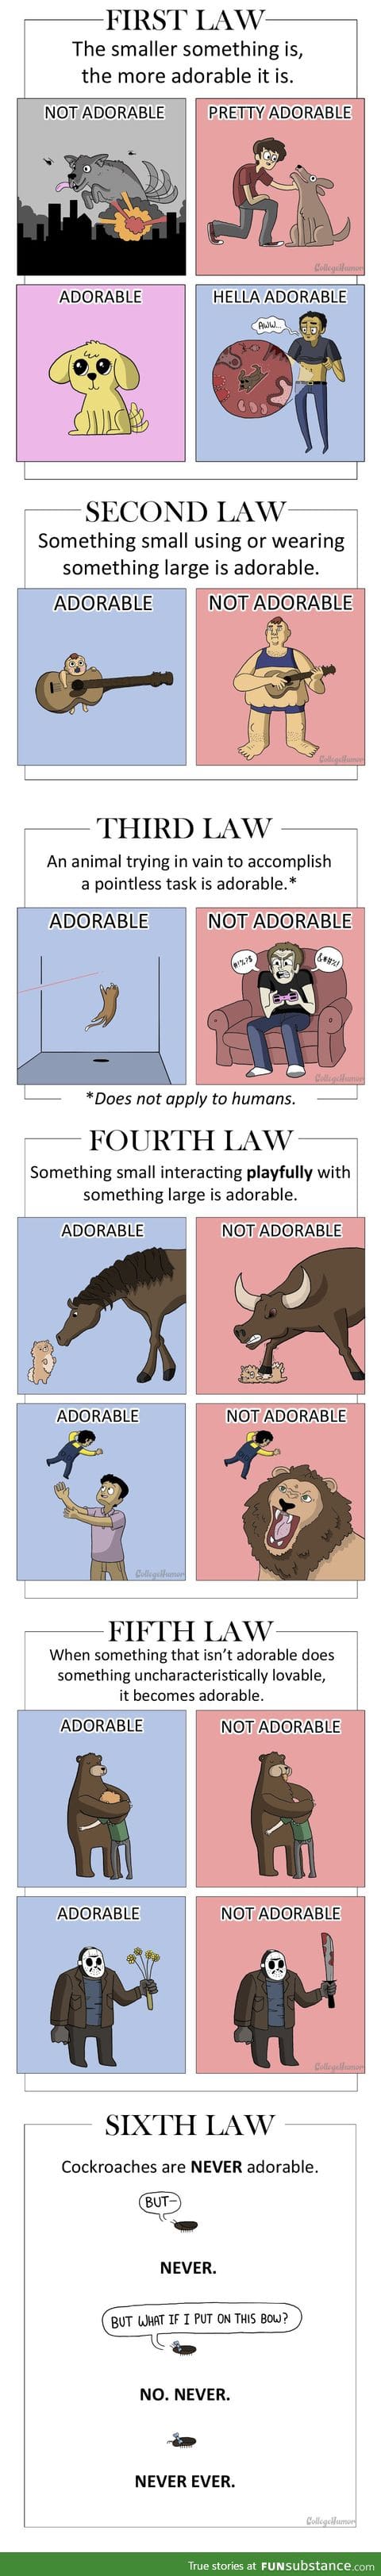 The Laws of Adorability.